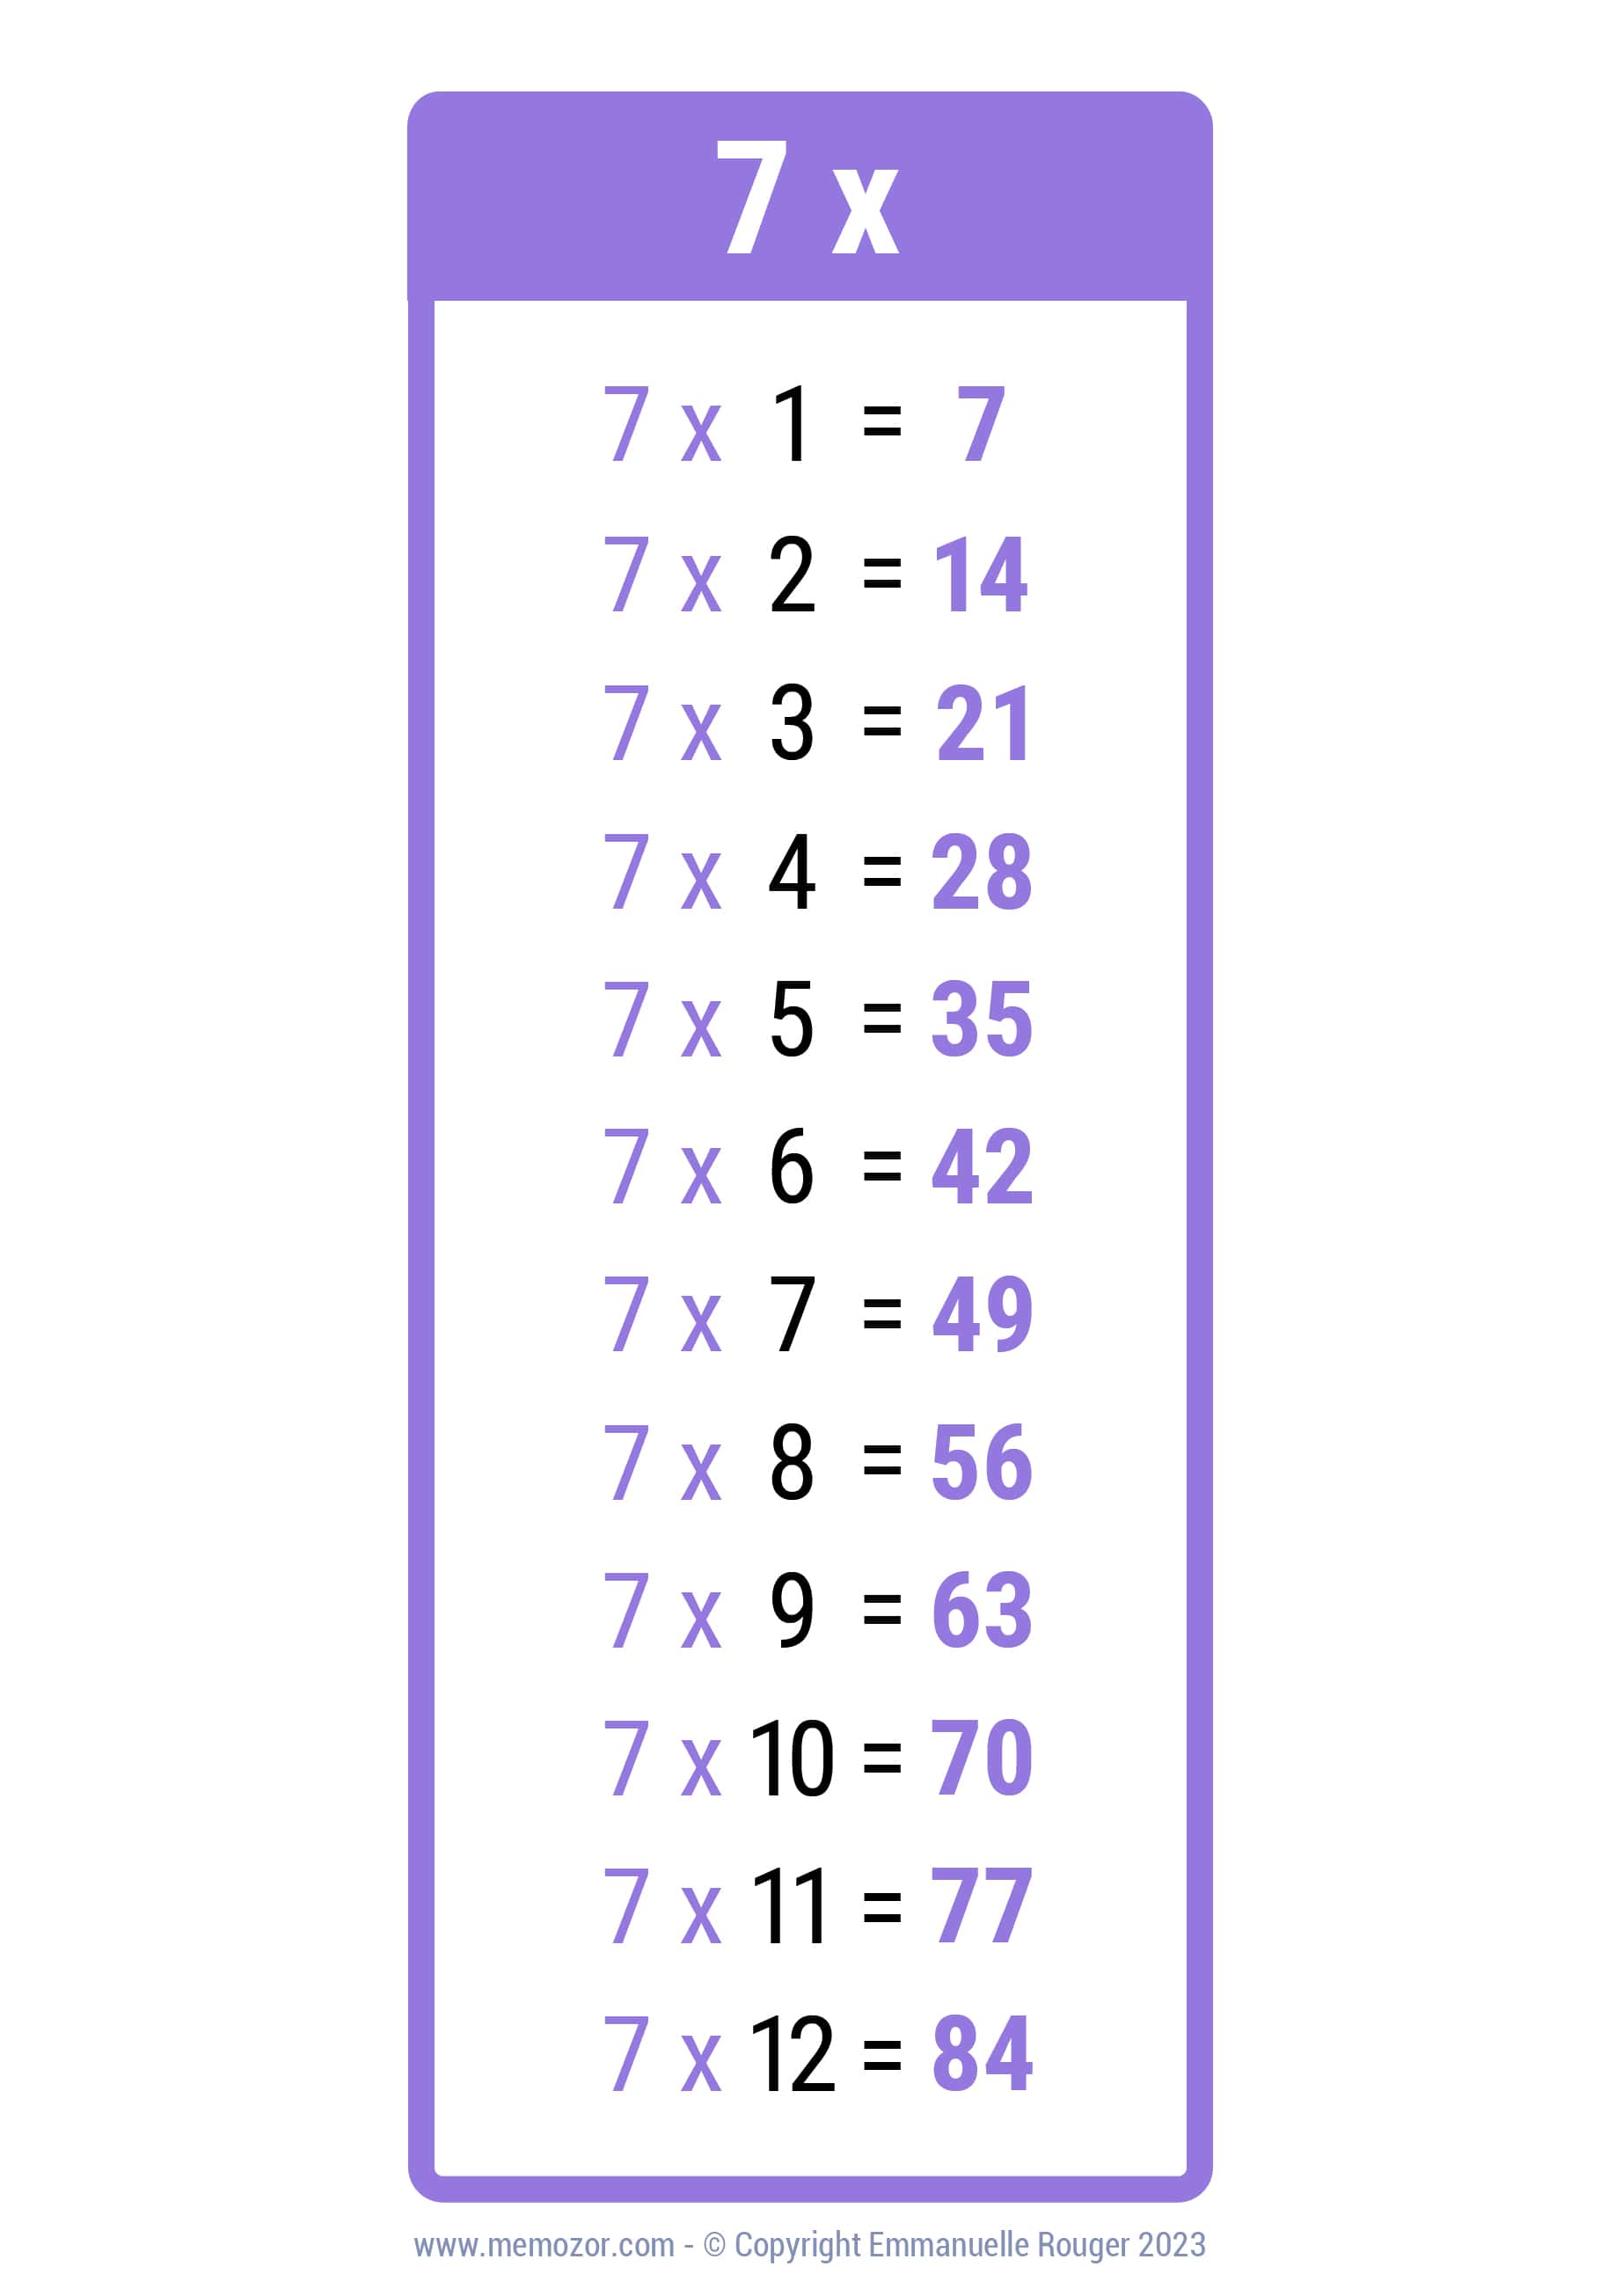 https://www.memozor.com/images/multiplication/printable_charts/7_times_table/zoom/7_times_table_chart.jpg